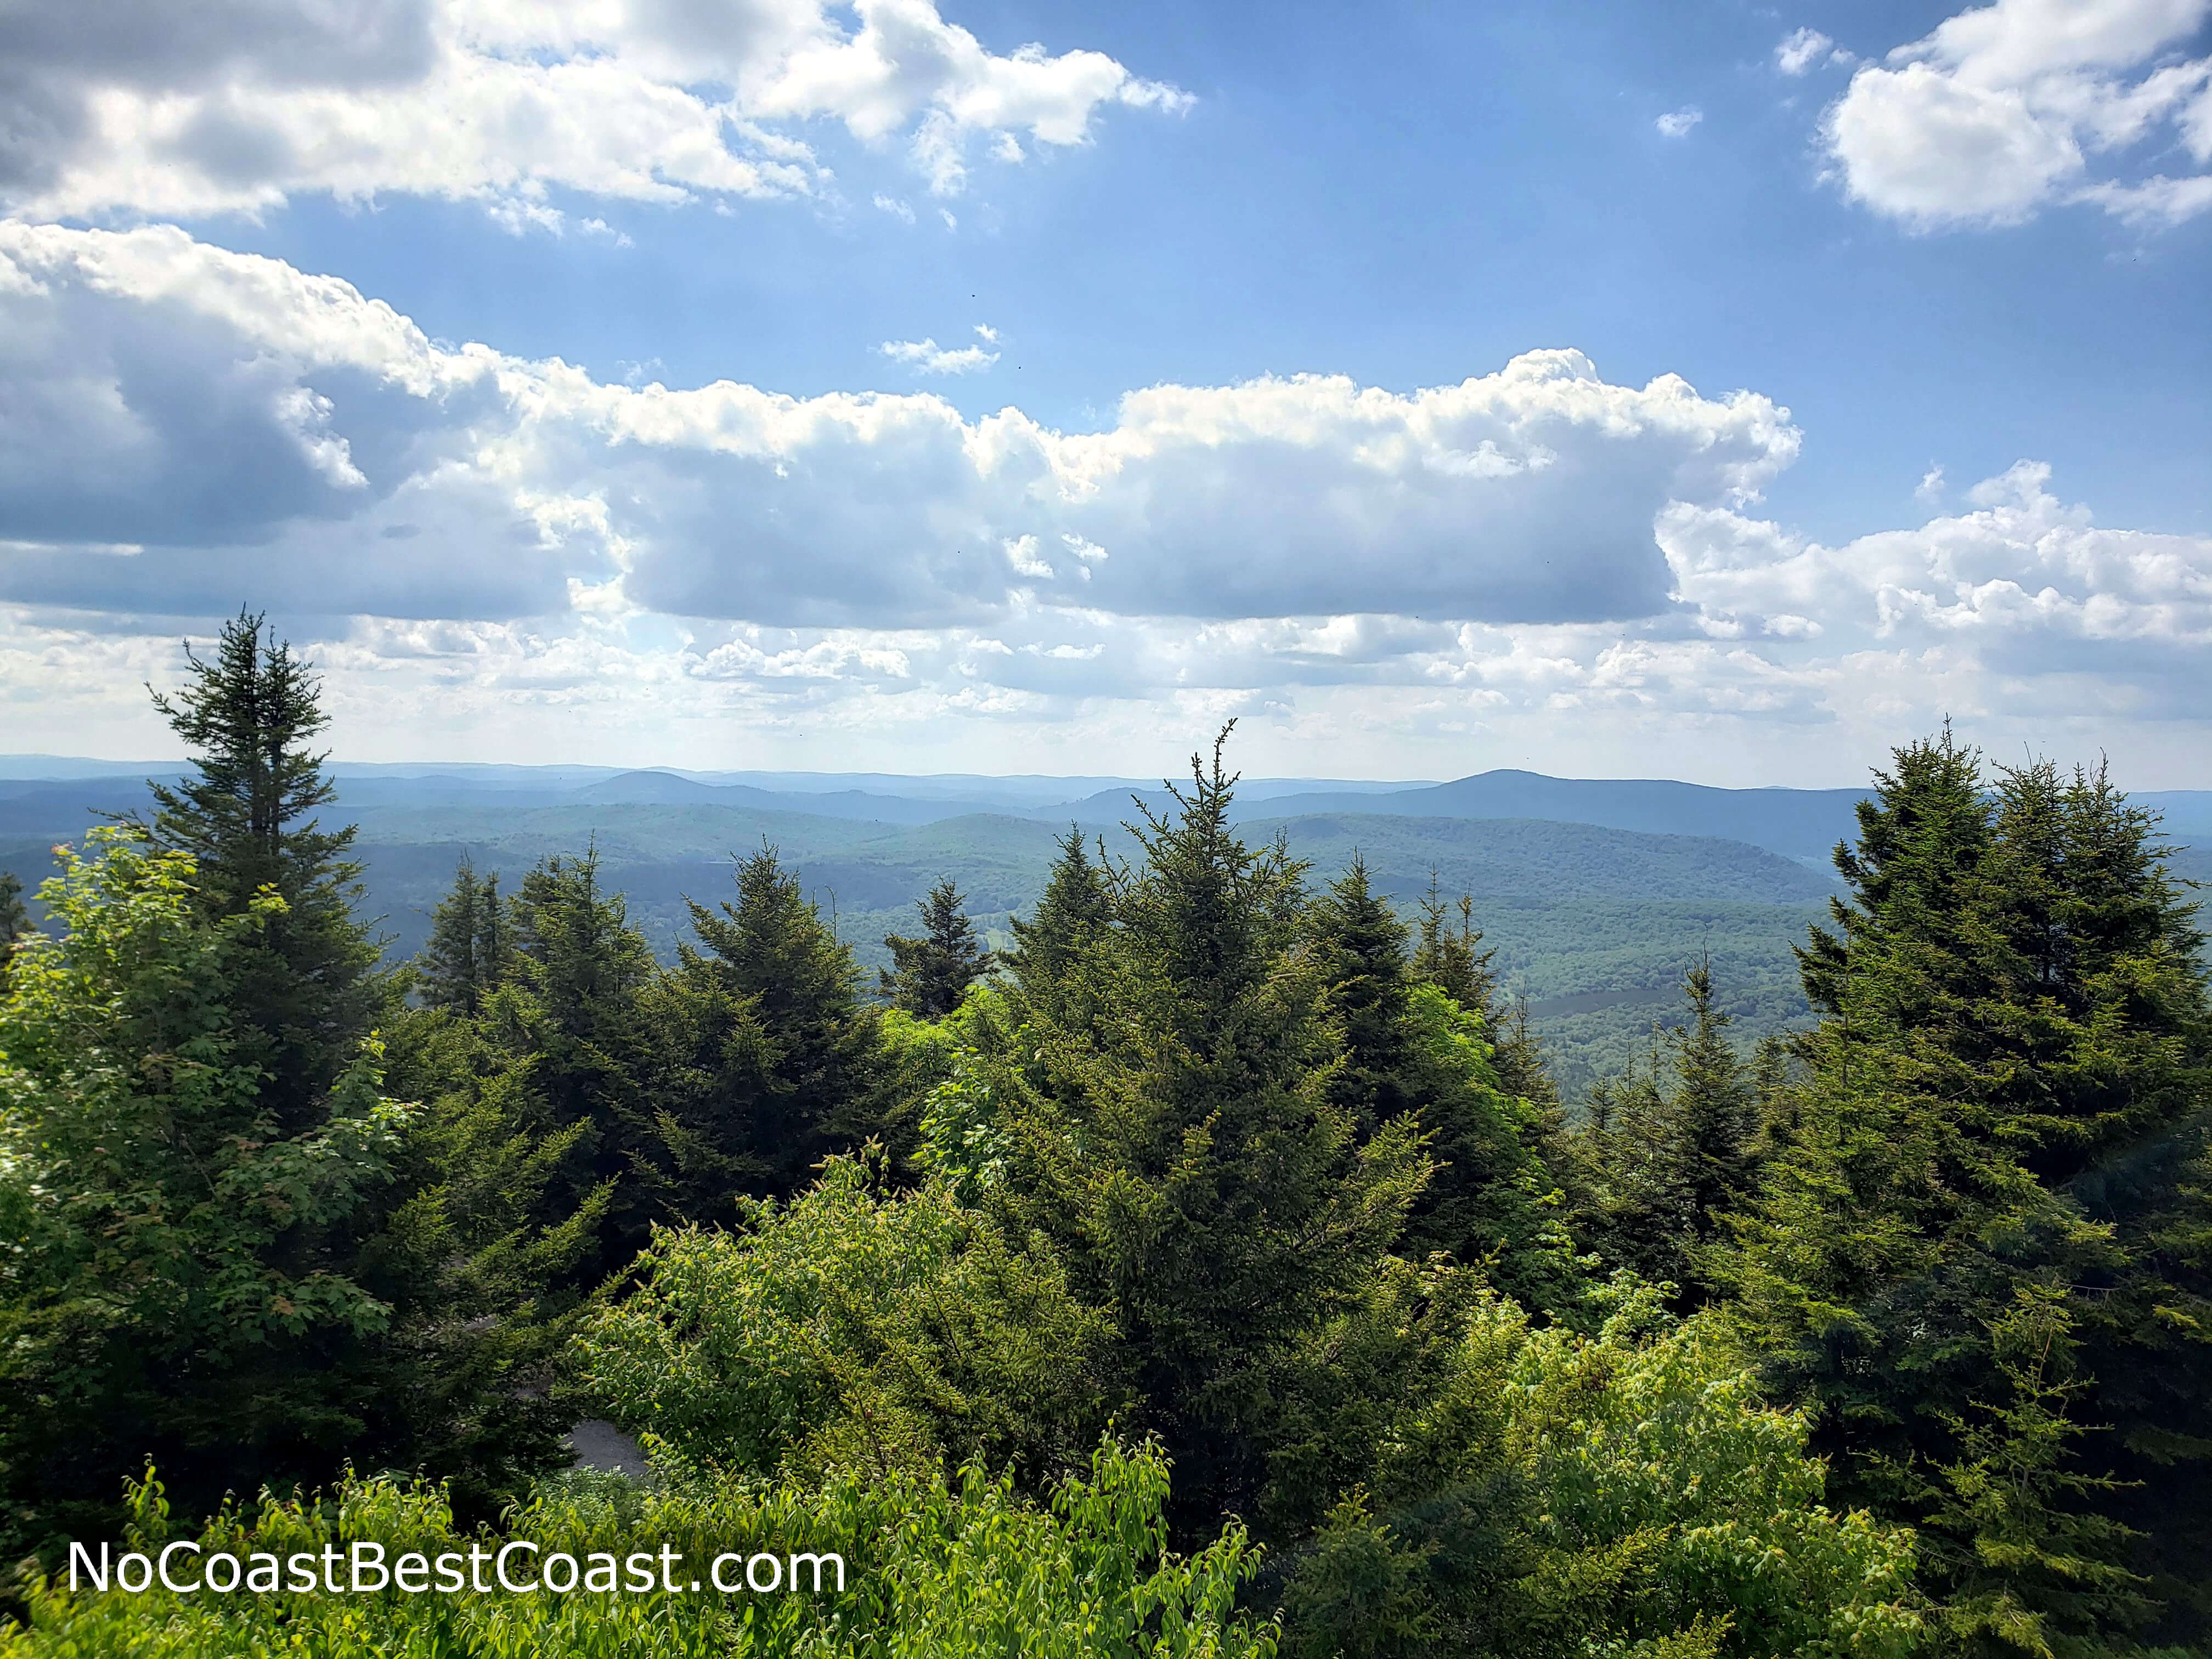 The view from atop the observation tower on Spruce Knob